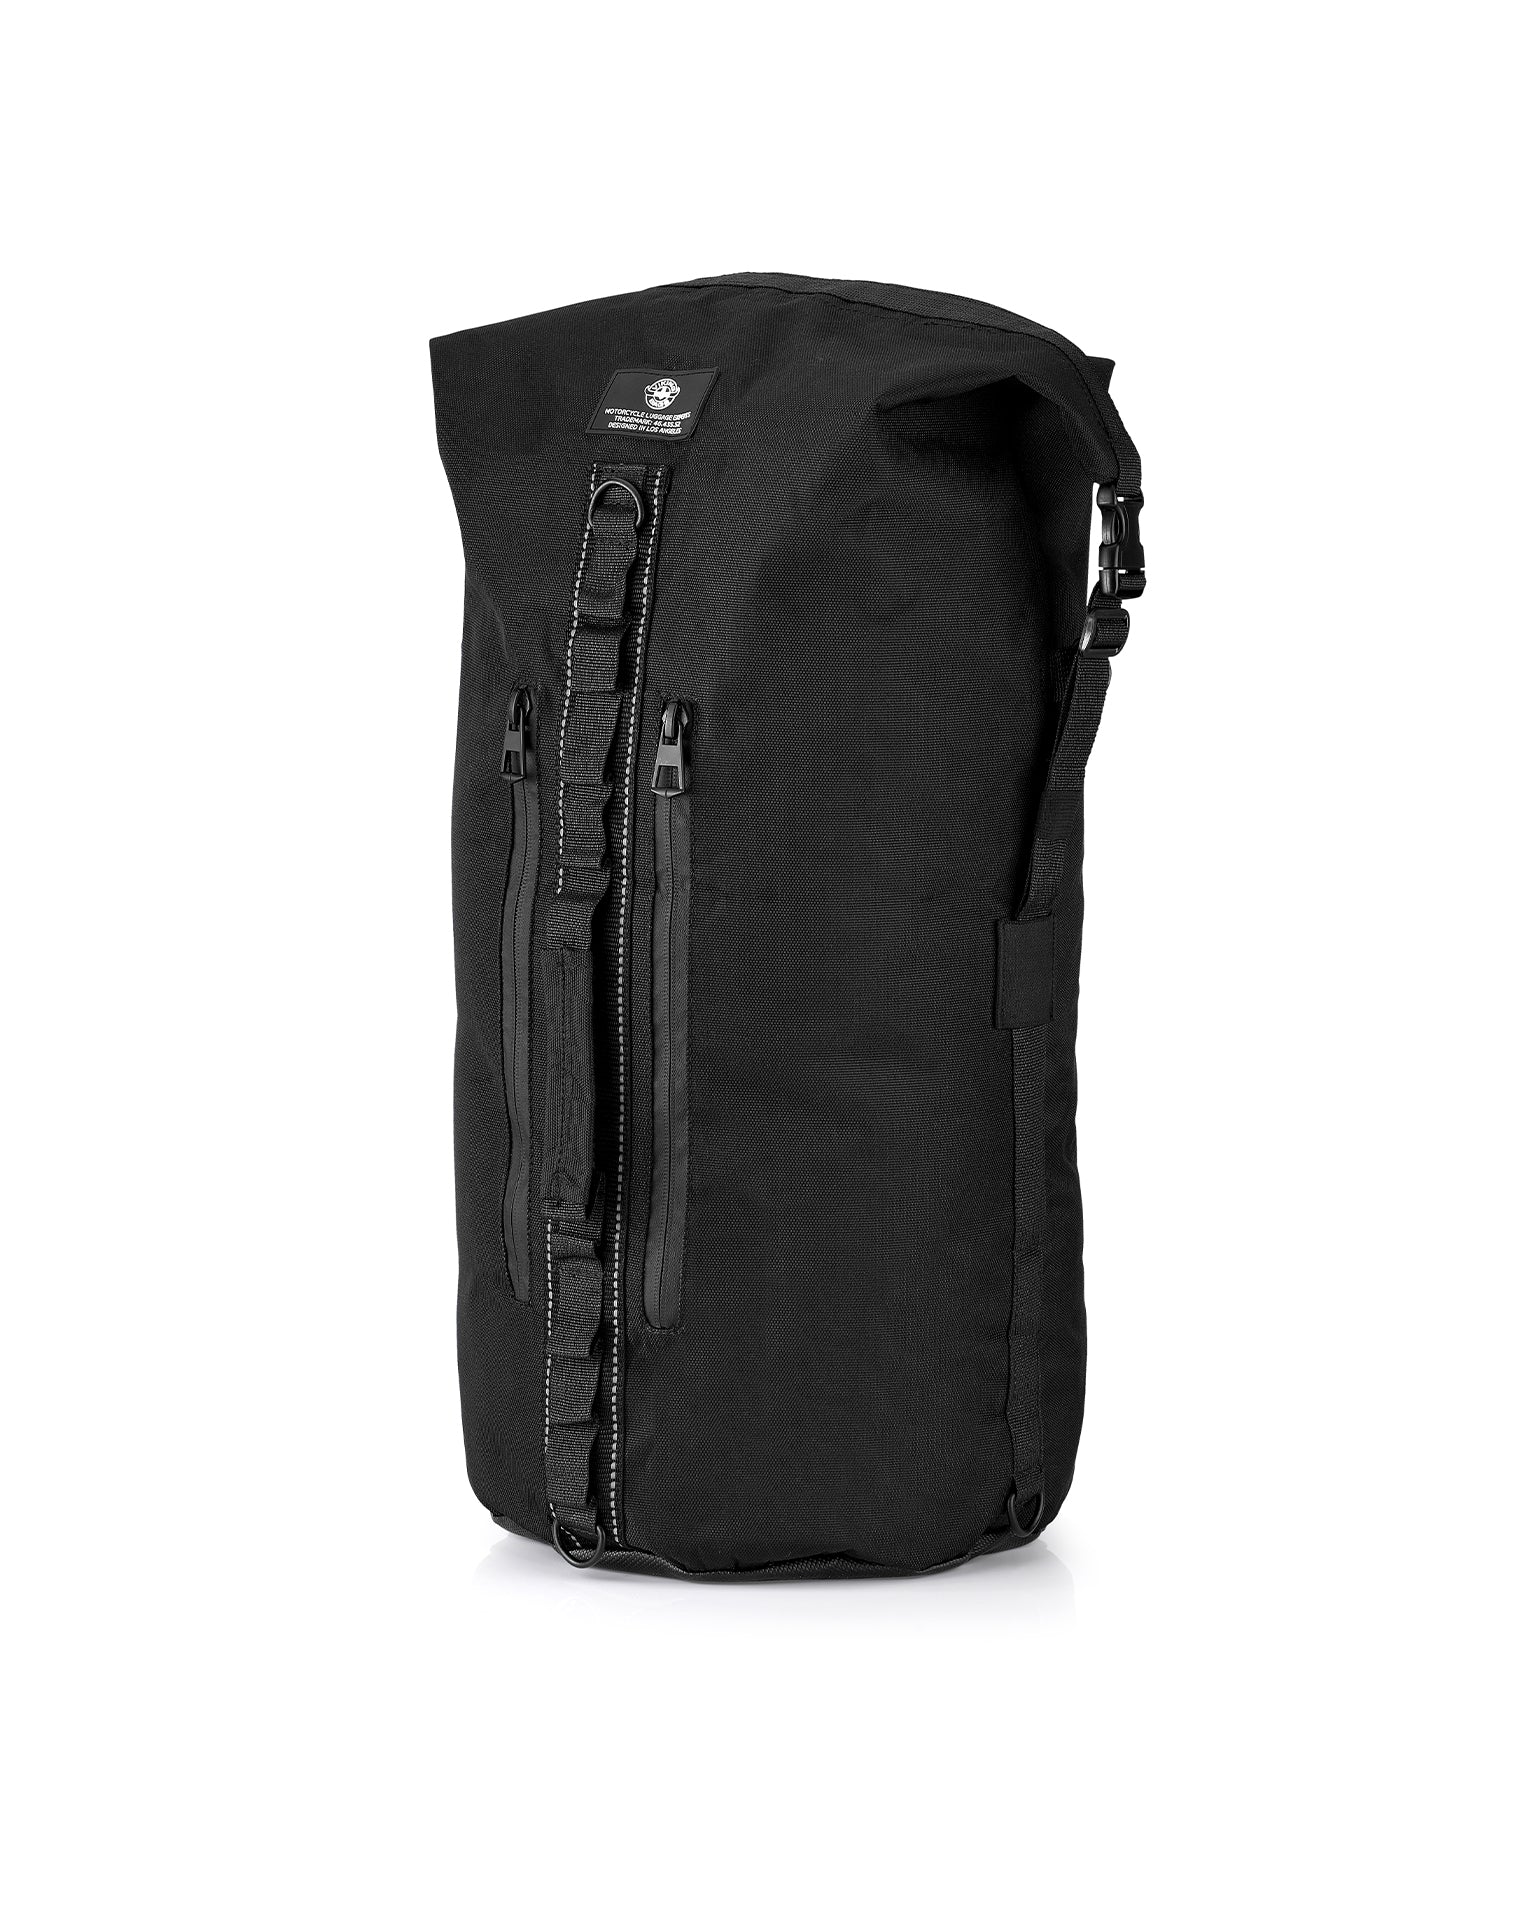 35L - Renegade XL Victory Motorcycle Tail Bag